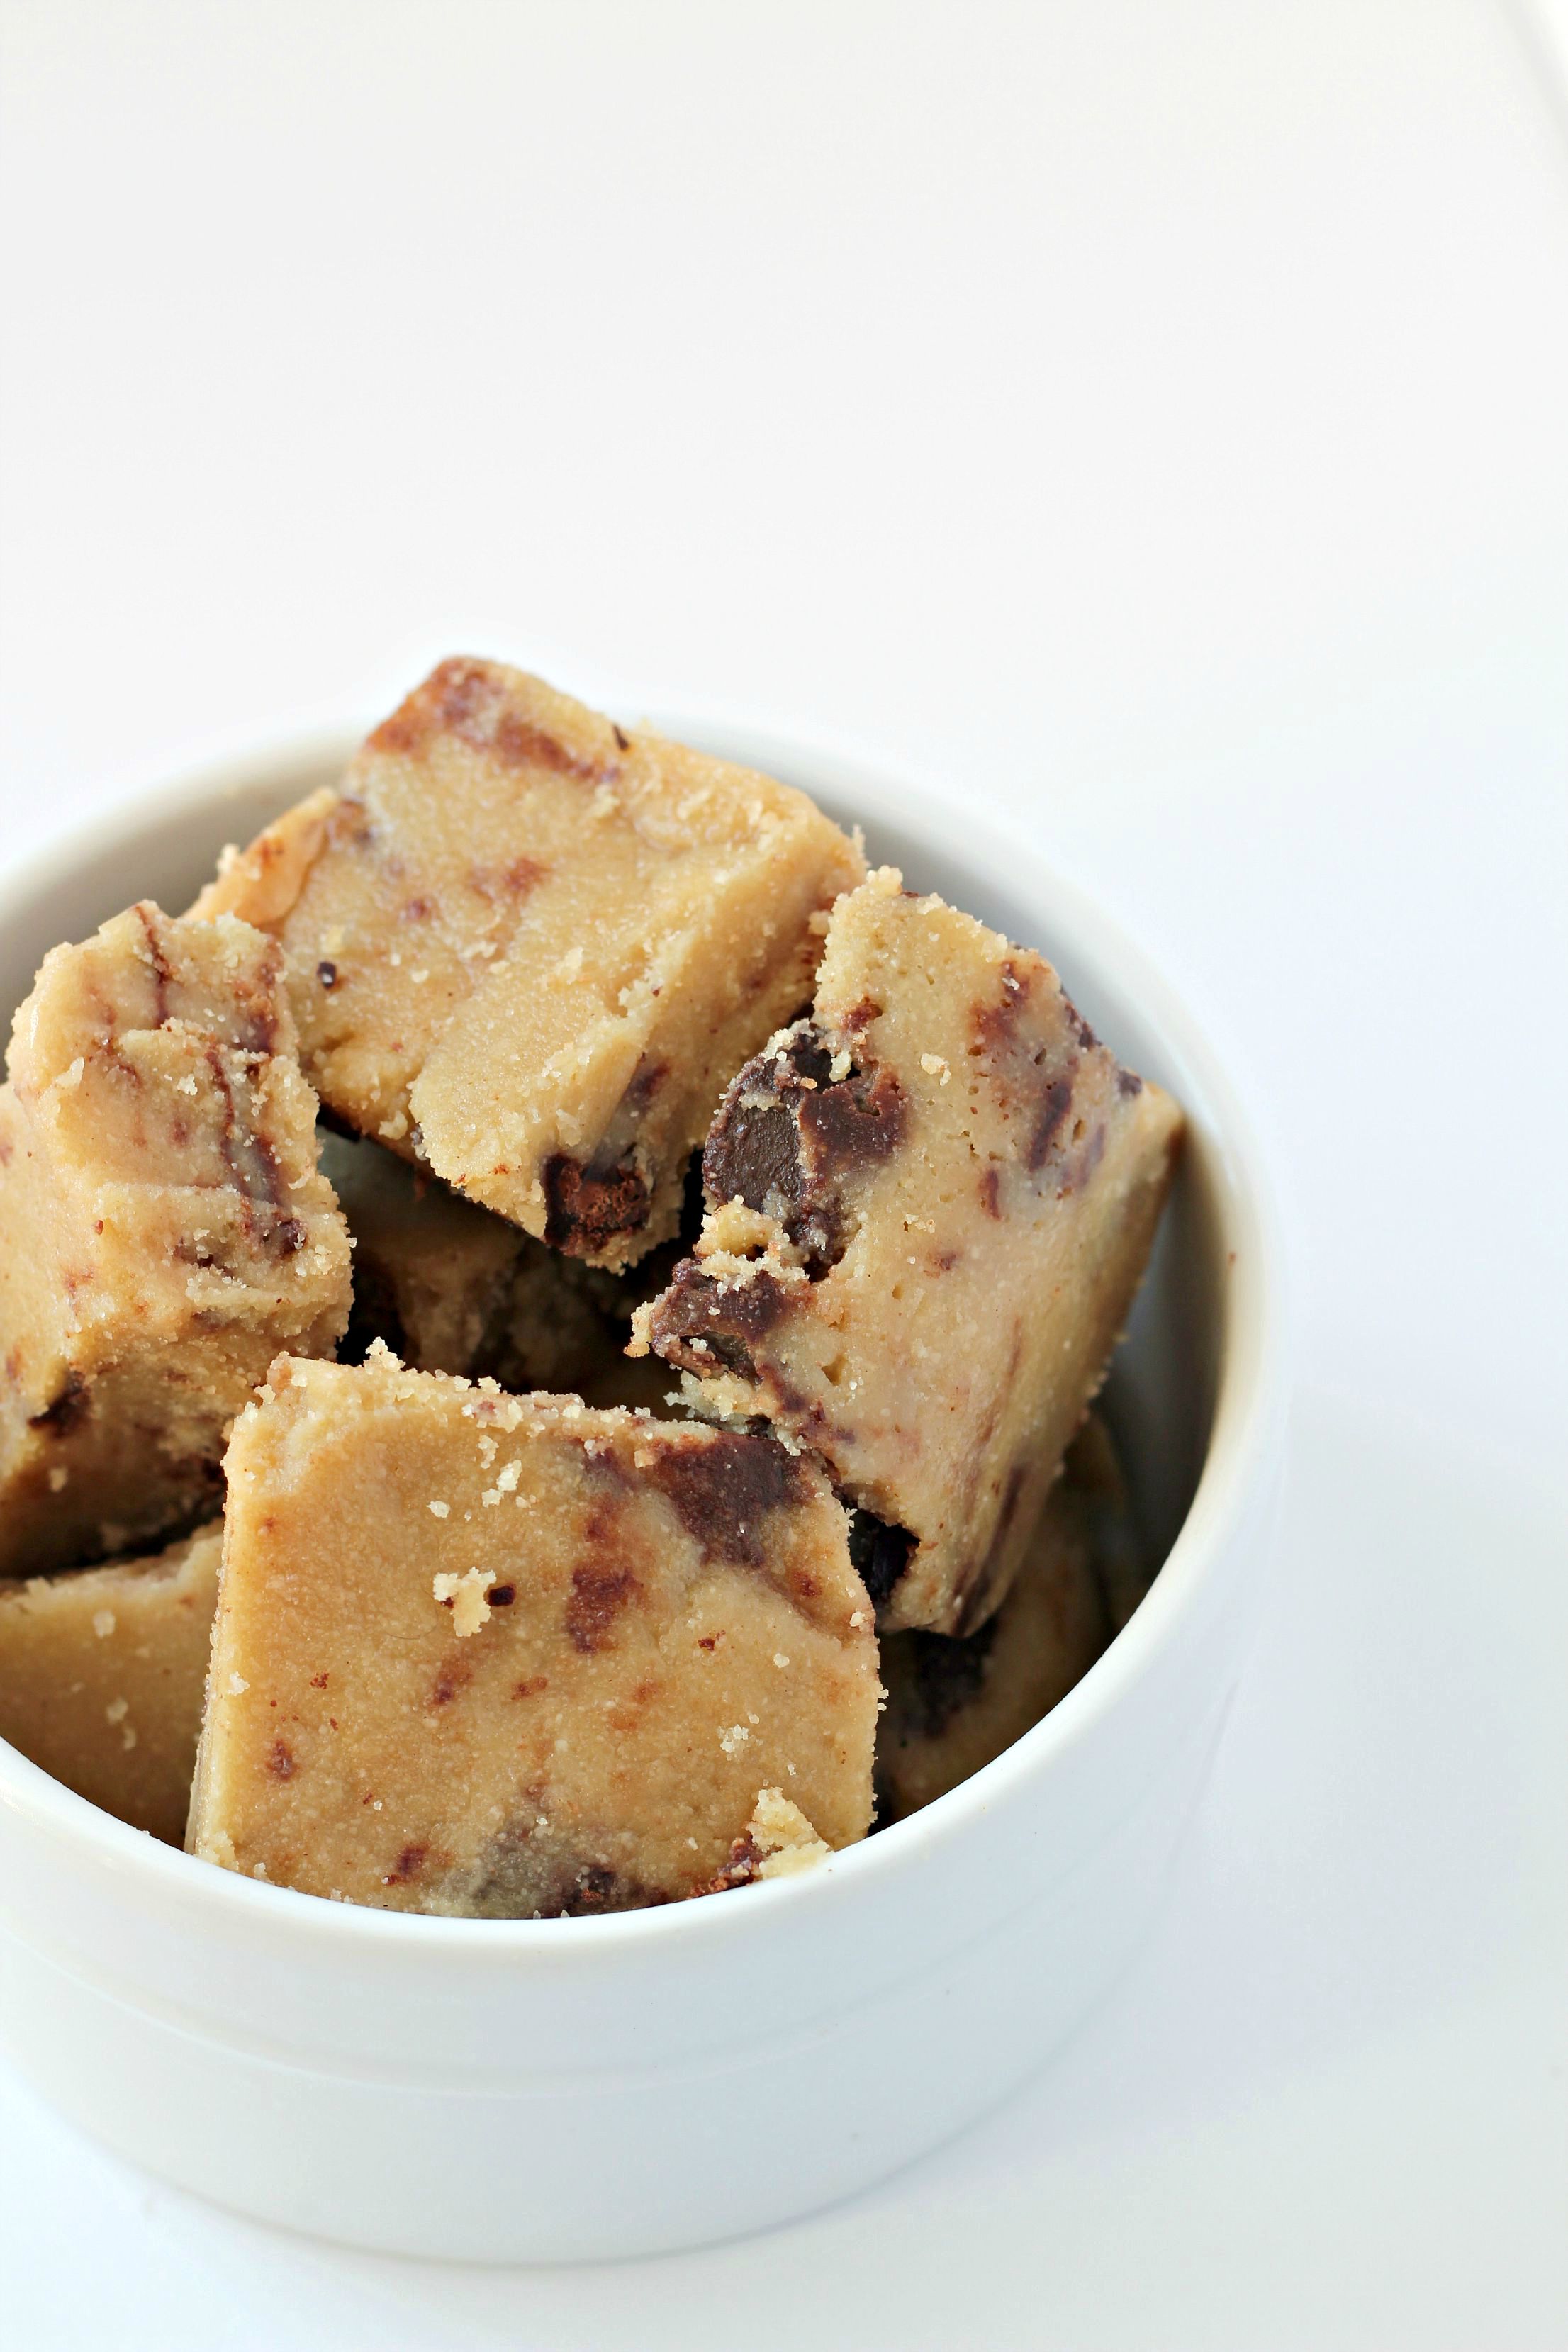 This Paleo Cookie Dough fudge is too good to be true! Gluten free, paleo, and just straight delicious!